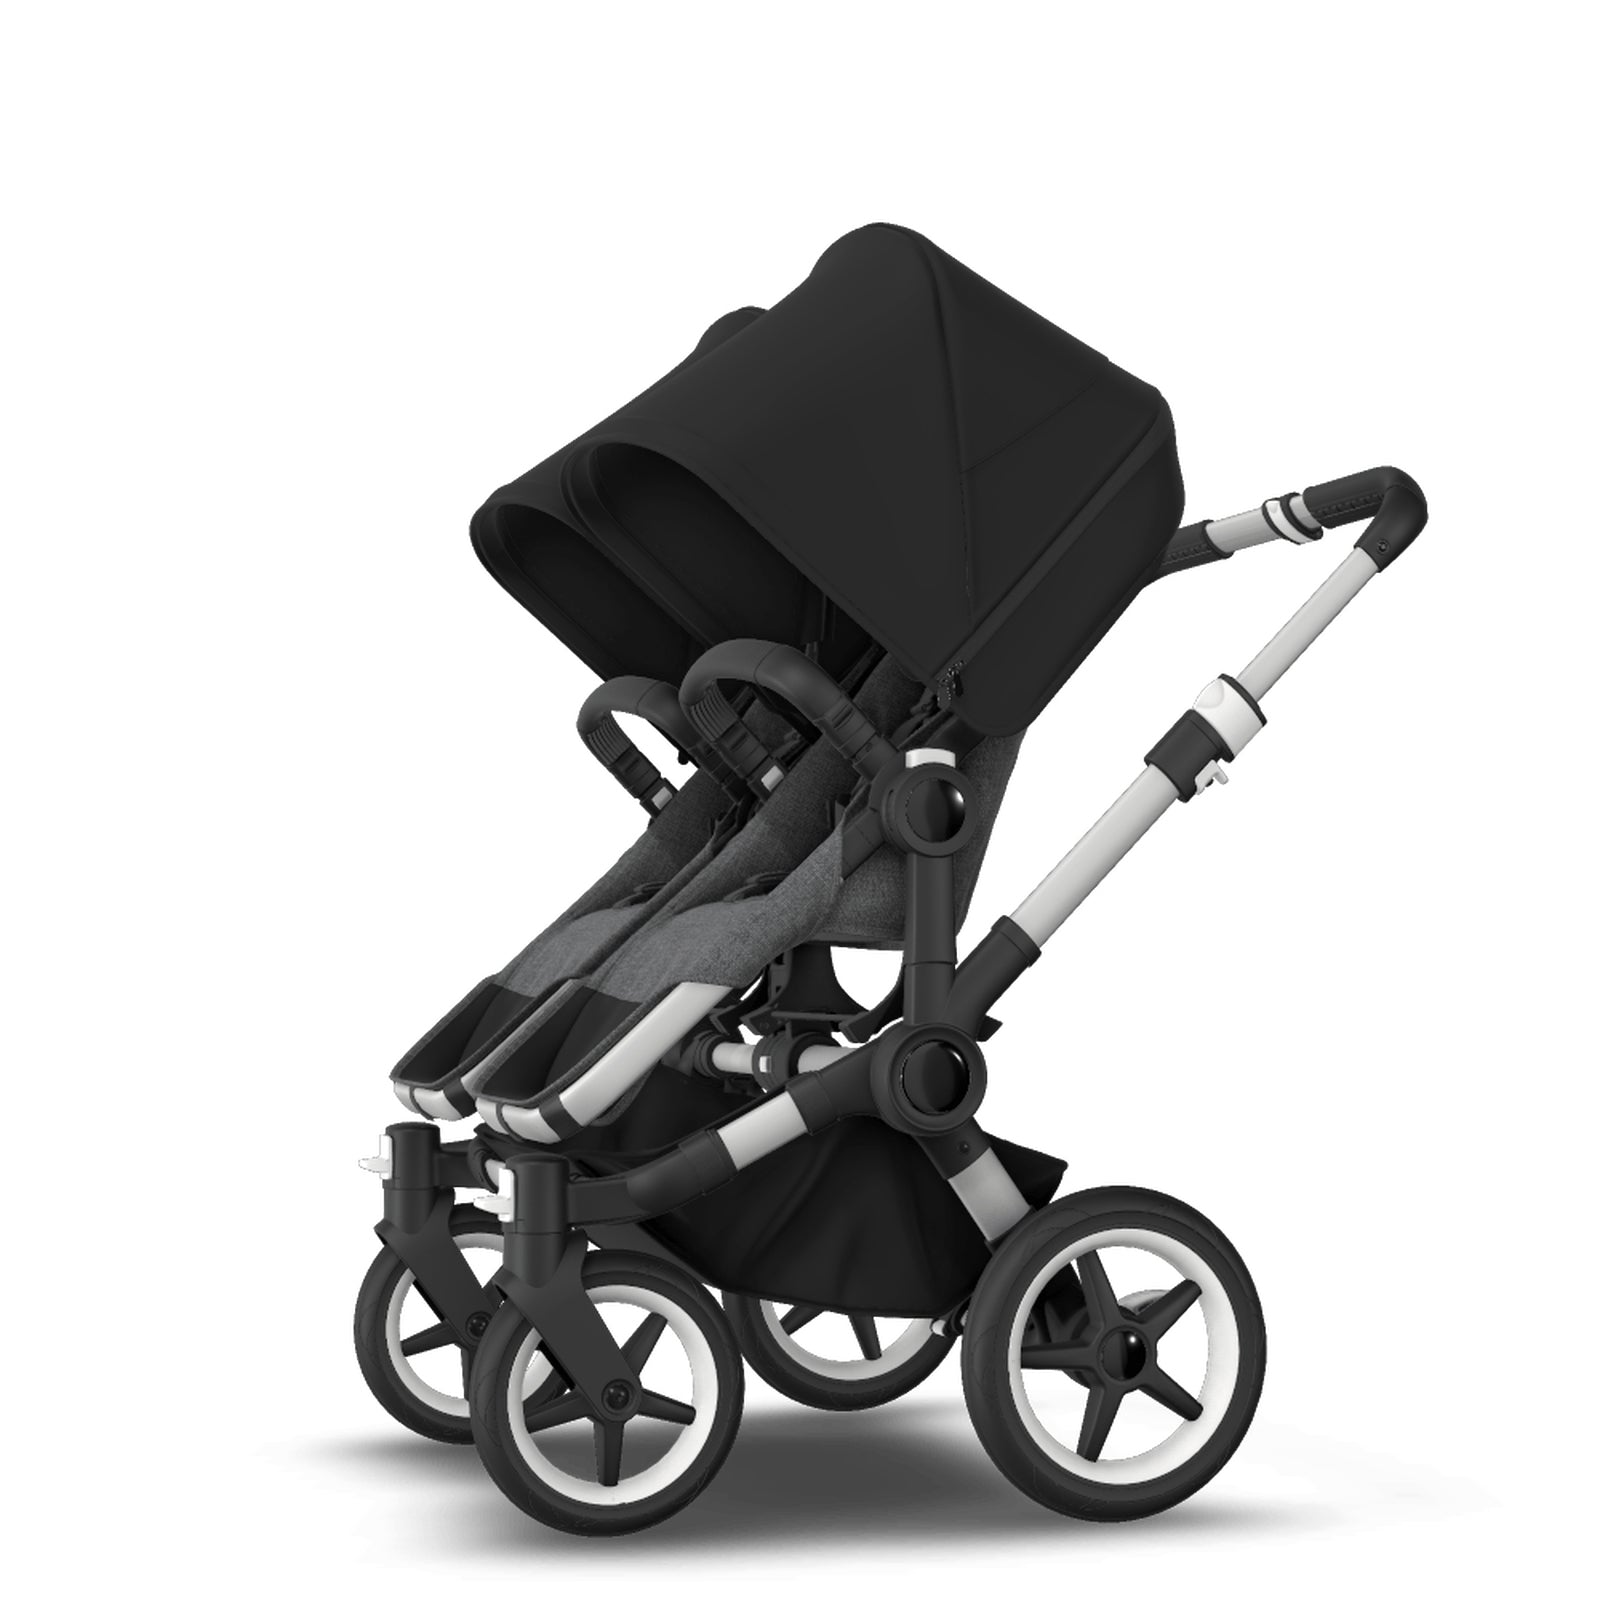 Bugaboo Donkey 3 Twin Seat and Carrycot Pushchair - Black